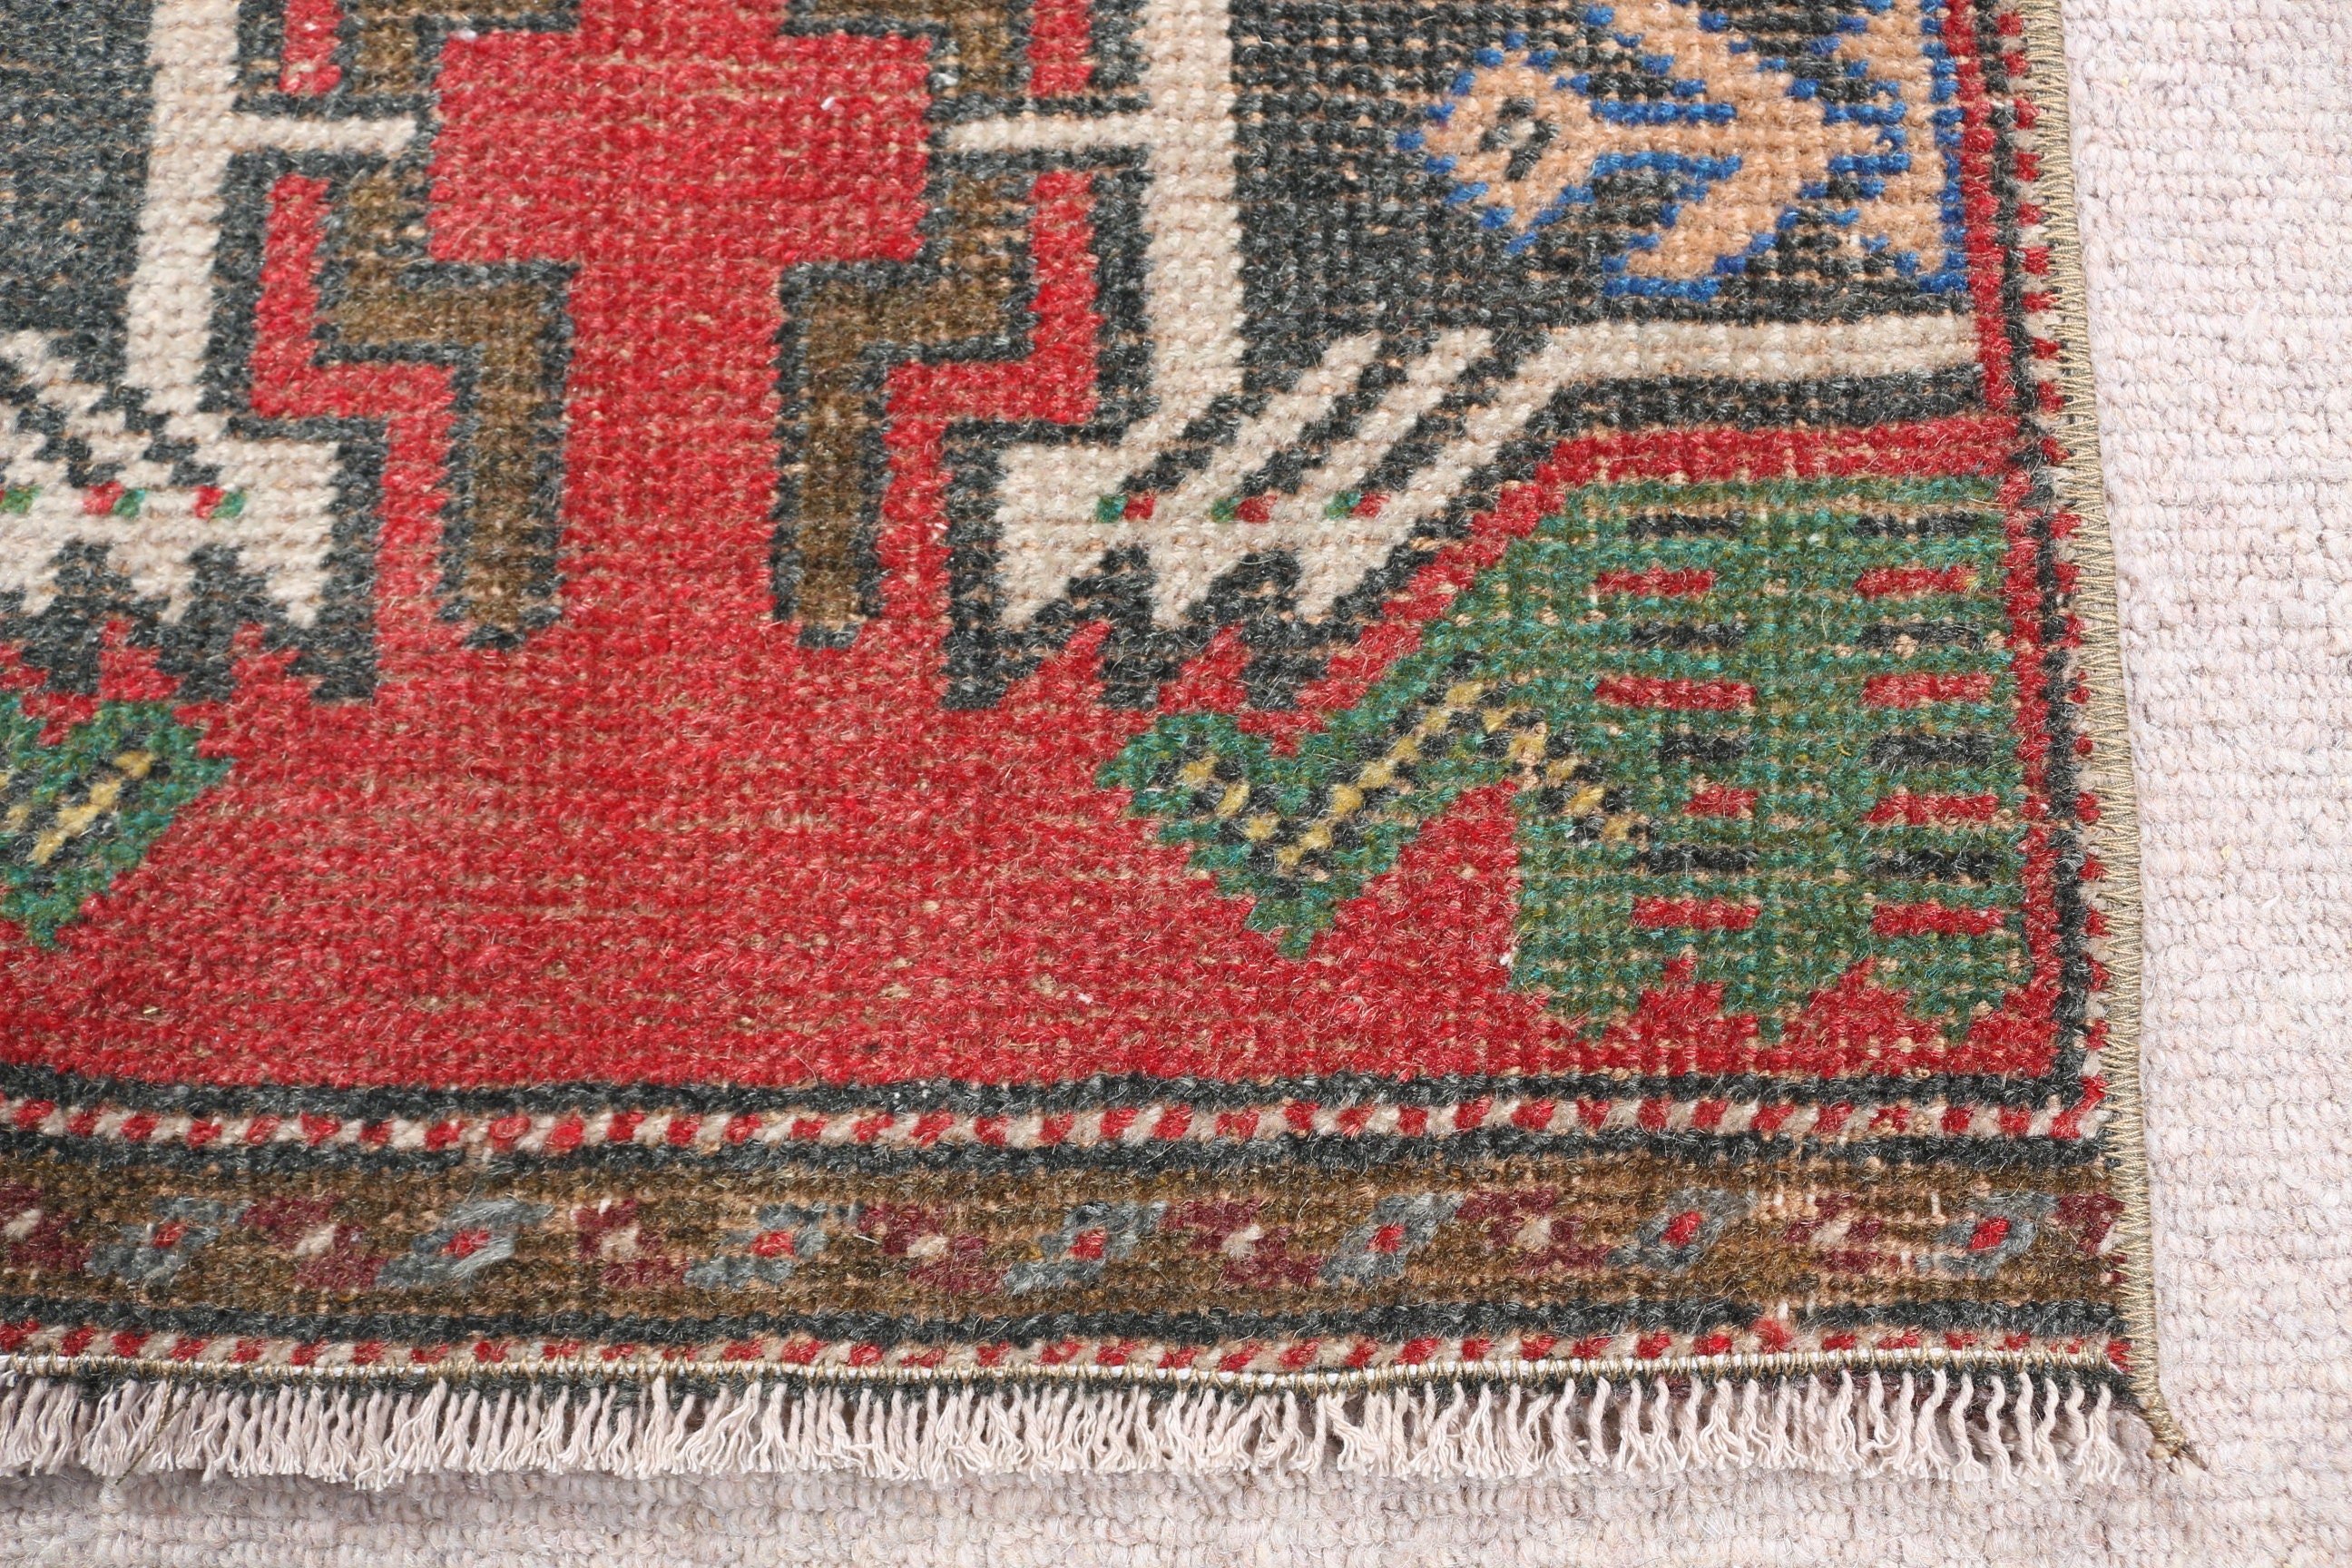 Oushak Rugs, Kitchen Rug, Vintage Rugs, 1.4x3.1 ft Small Rug, Rugs for Nursery, Oriental Rug, Red Anatolian Rug, Turkish Rug, Entry Rugs